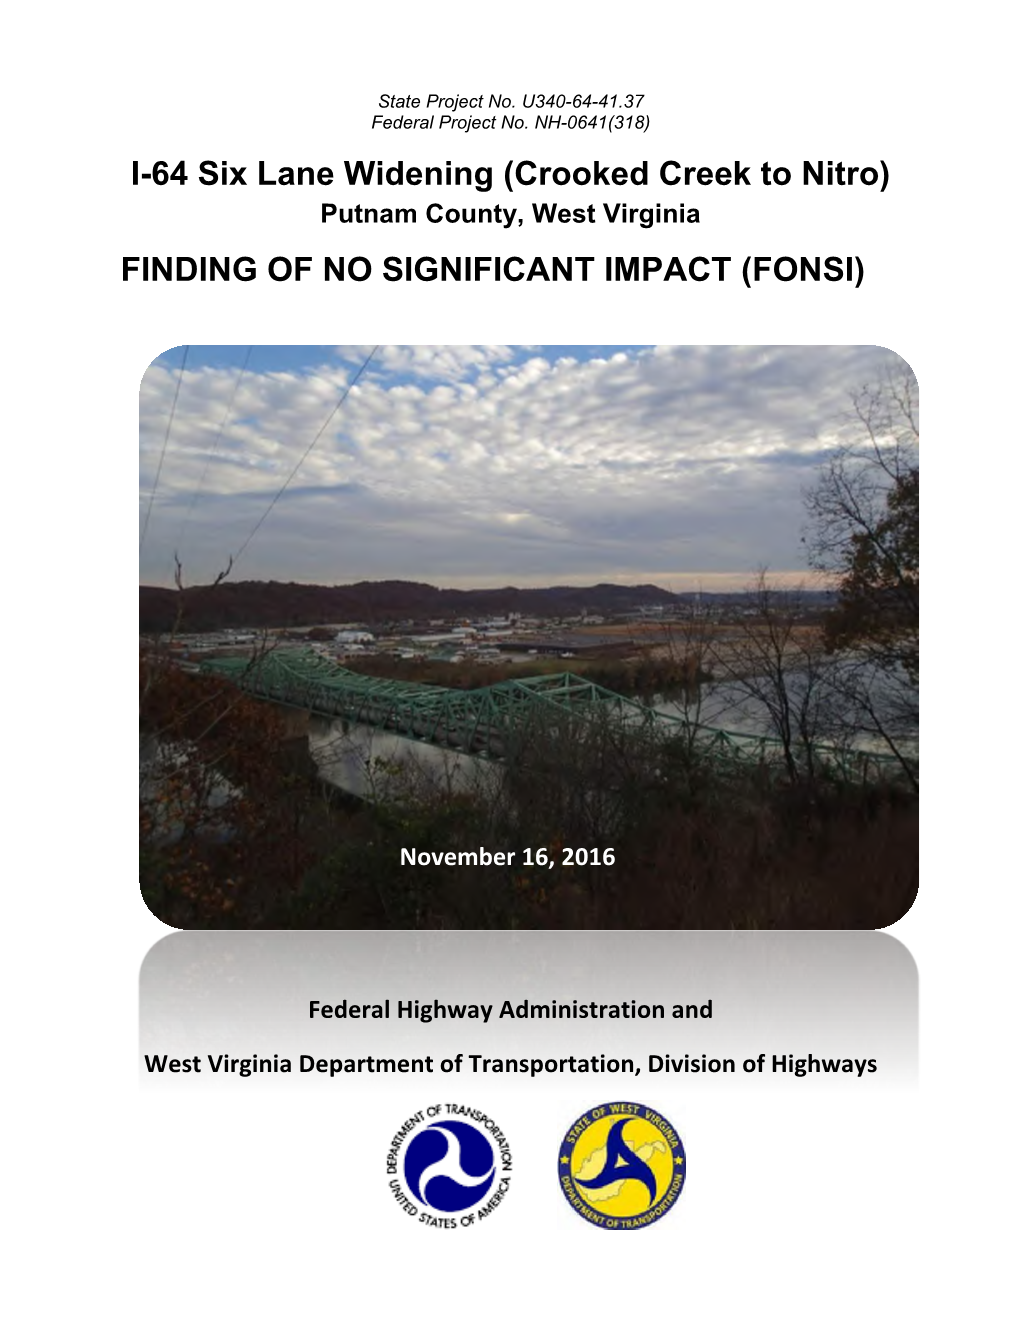 I-64 Six Lane Widening (Crooked Creek to Nitro) Putnam County, West Virginia FINDING of NO SIGNIFICANT IMPACT (FONSI)